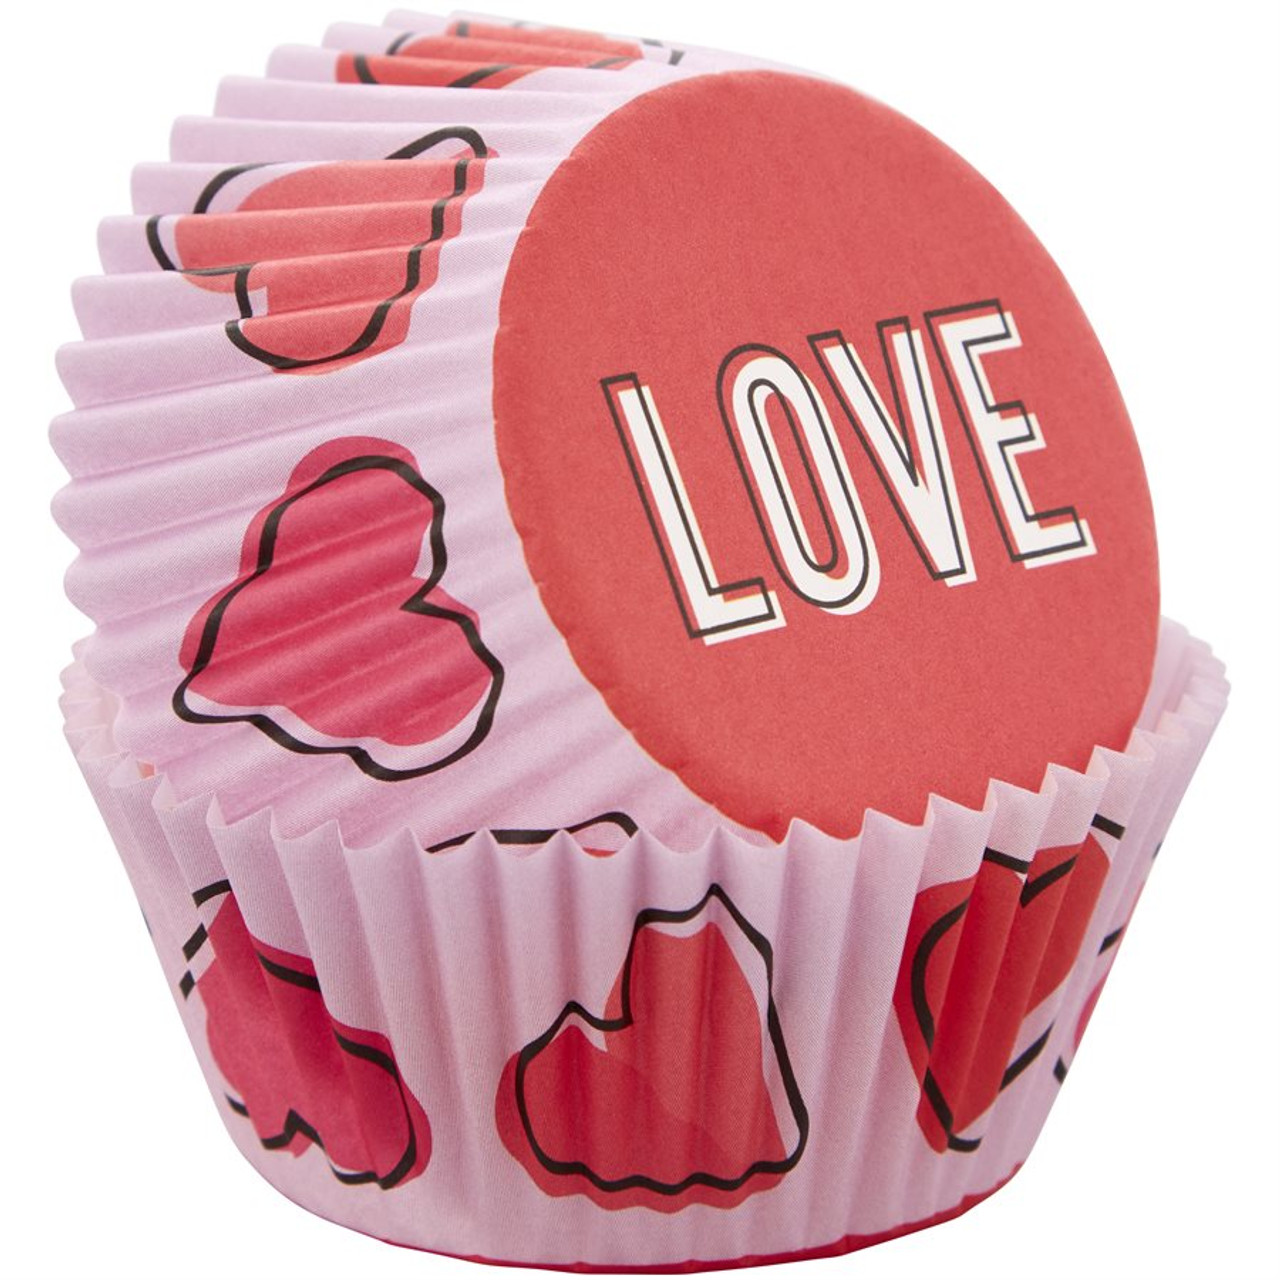 https://cdn11.bigcommerce.com/s-w8h1g5/images/stencil/1280x1280/products/13300/36428/415-0-0613_LoveBakingCups_332774_Product03-Z__58473.1670203064.jpg?c=2